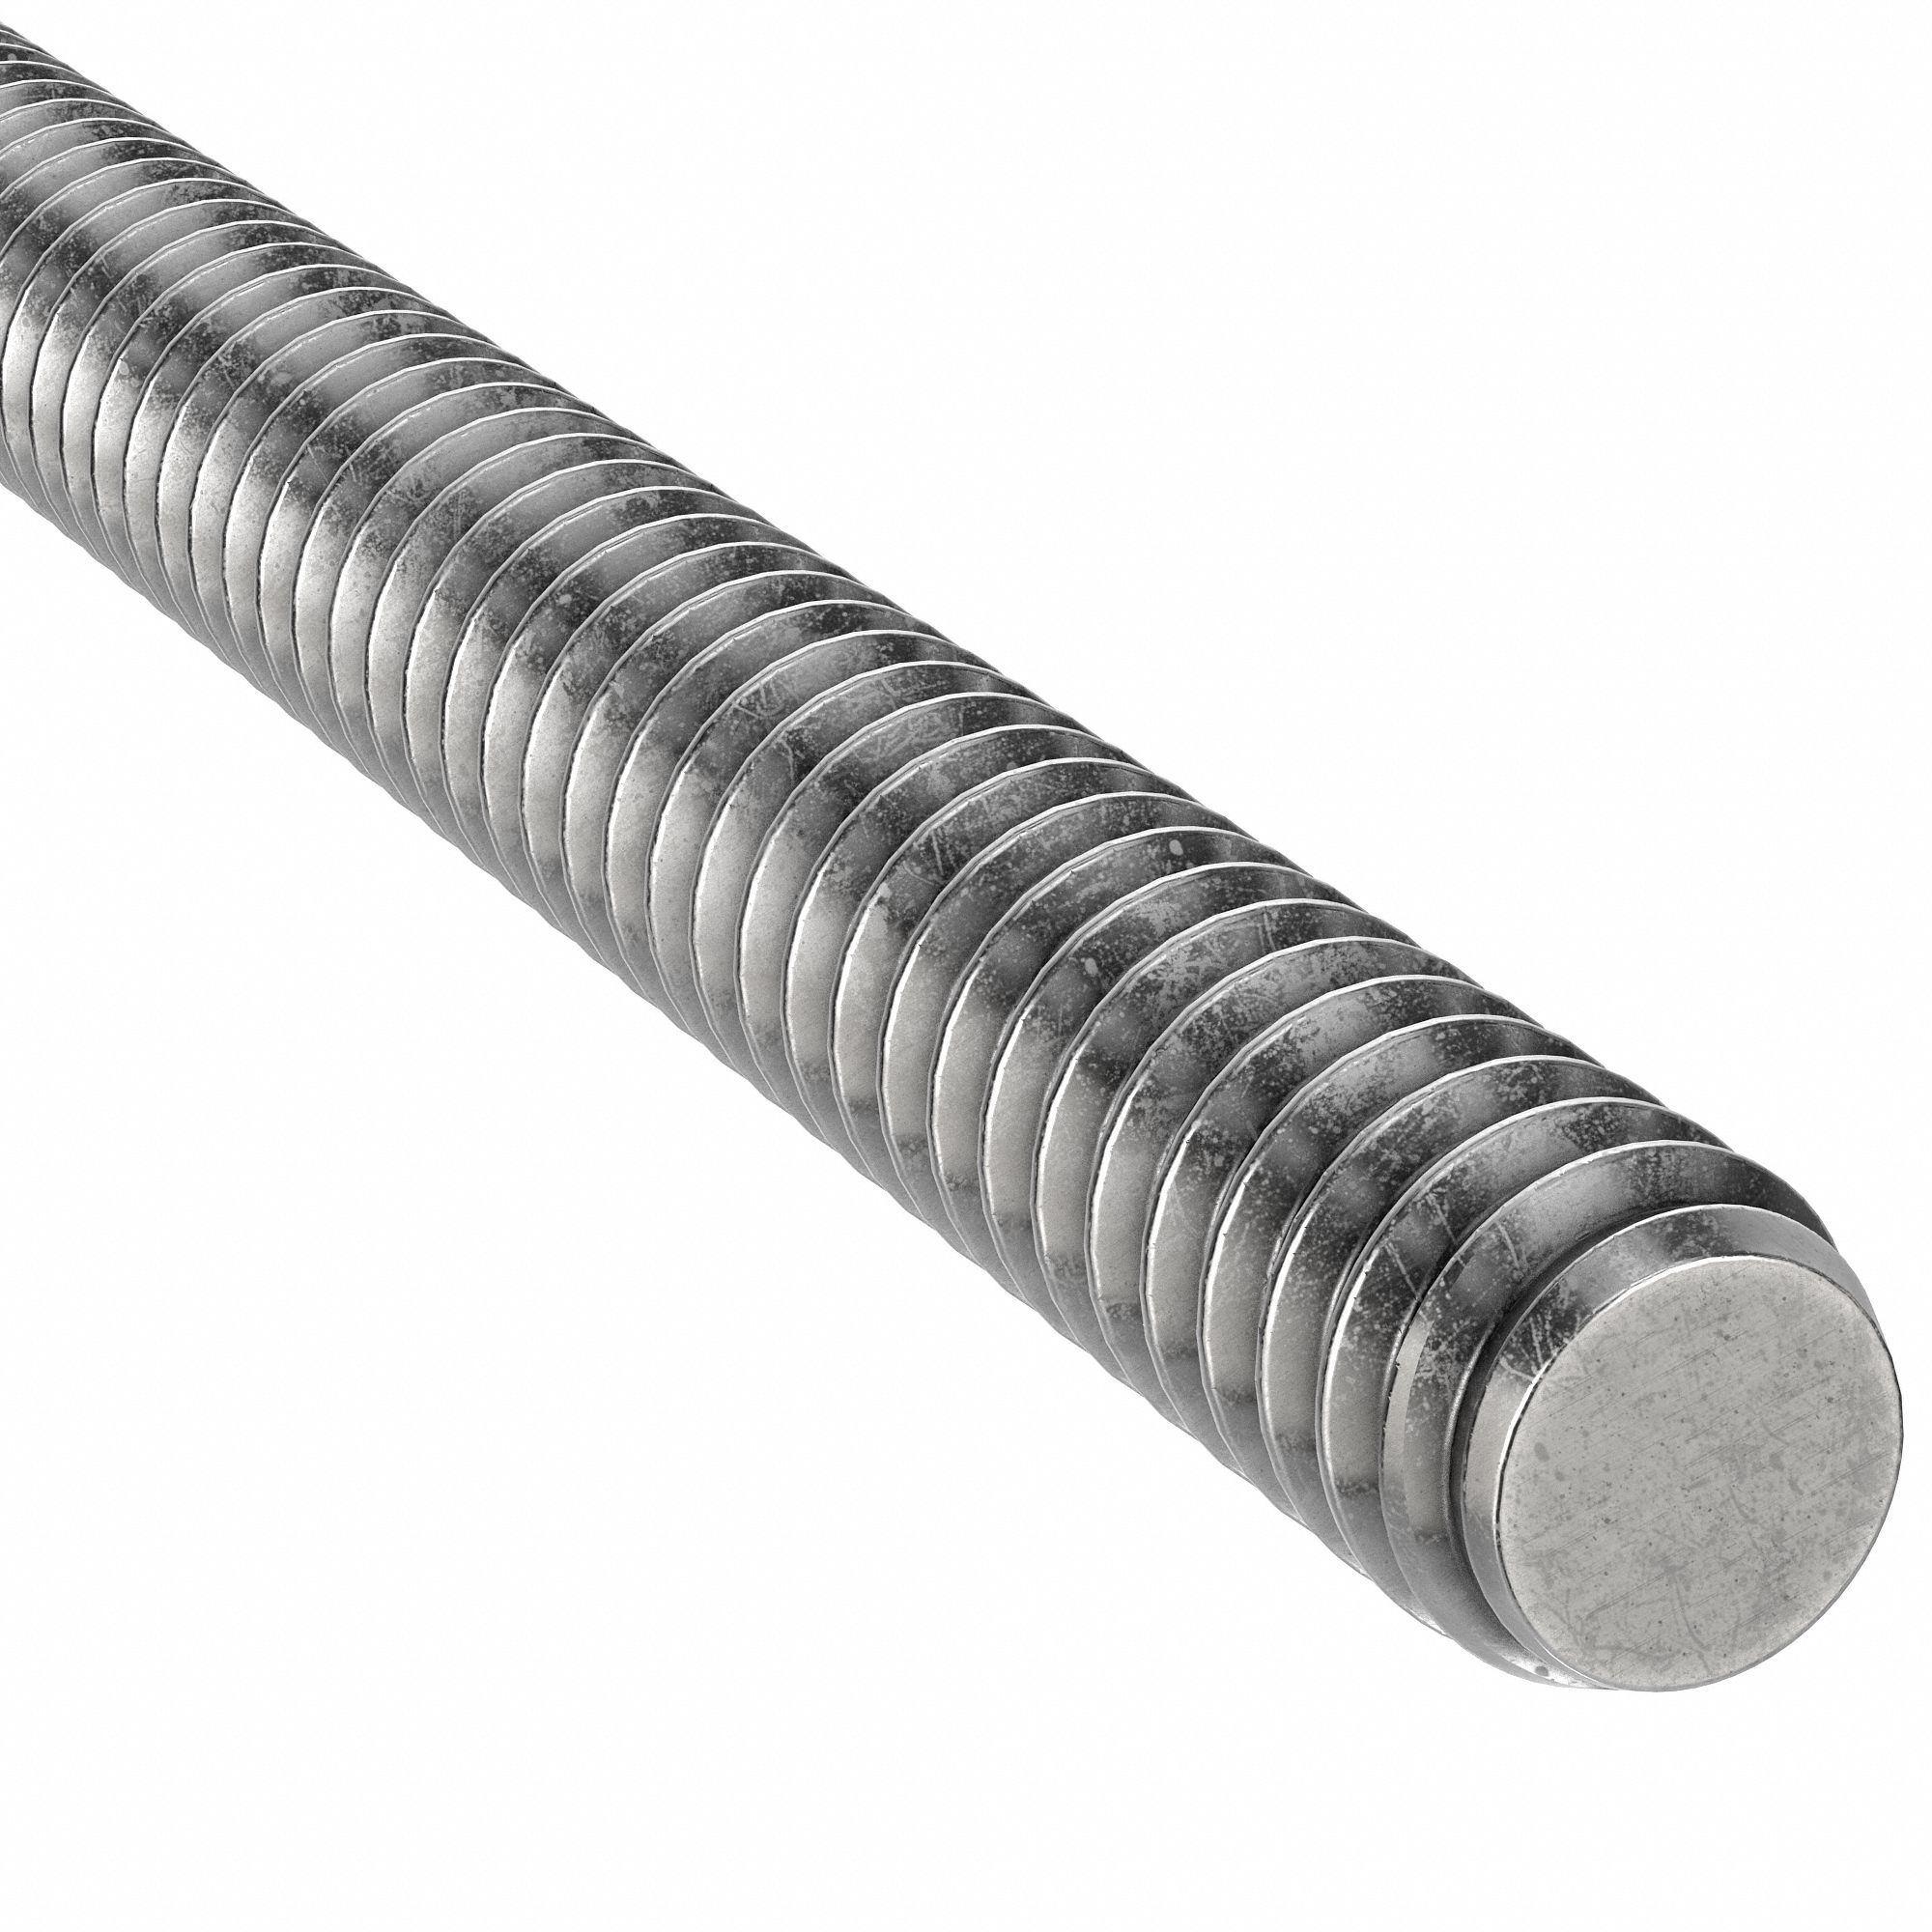 1/4" 5/16" 3/8" 1/2" 5/8" 3/4" 1" Steel Threaded Rod Screw 100mm to 600mm Select 